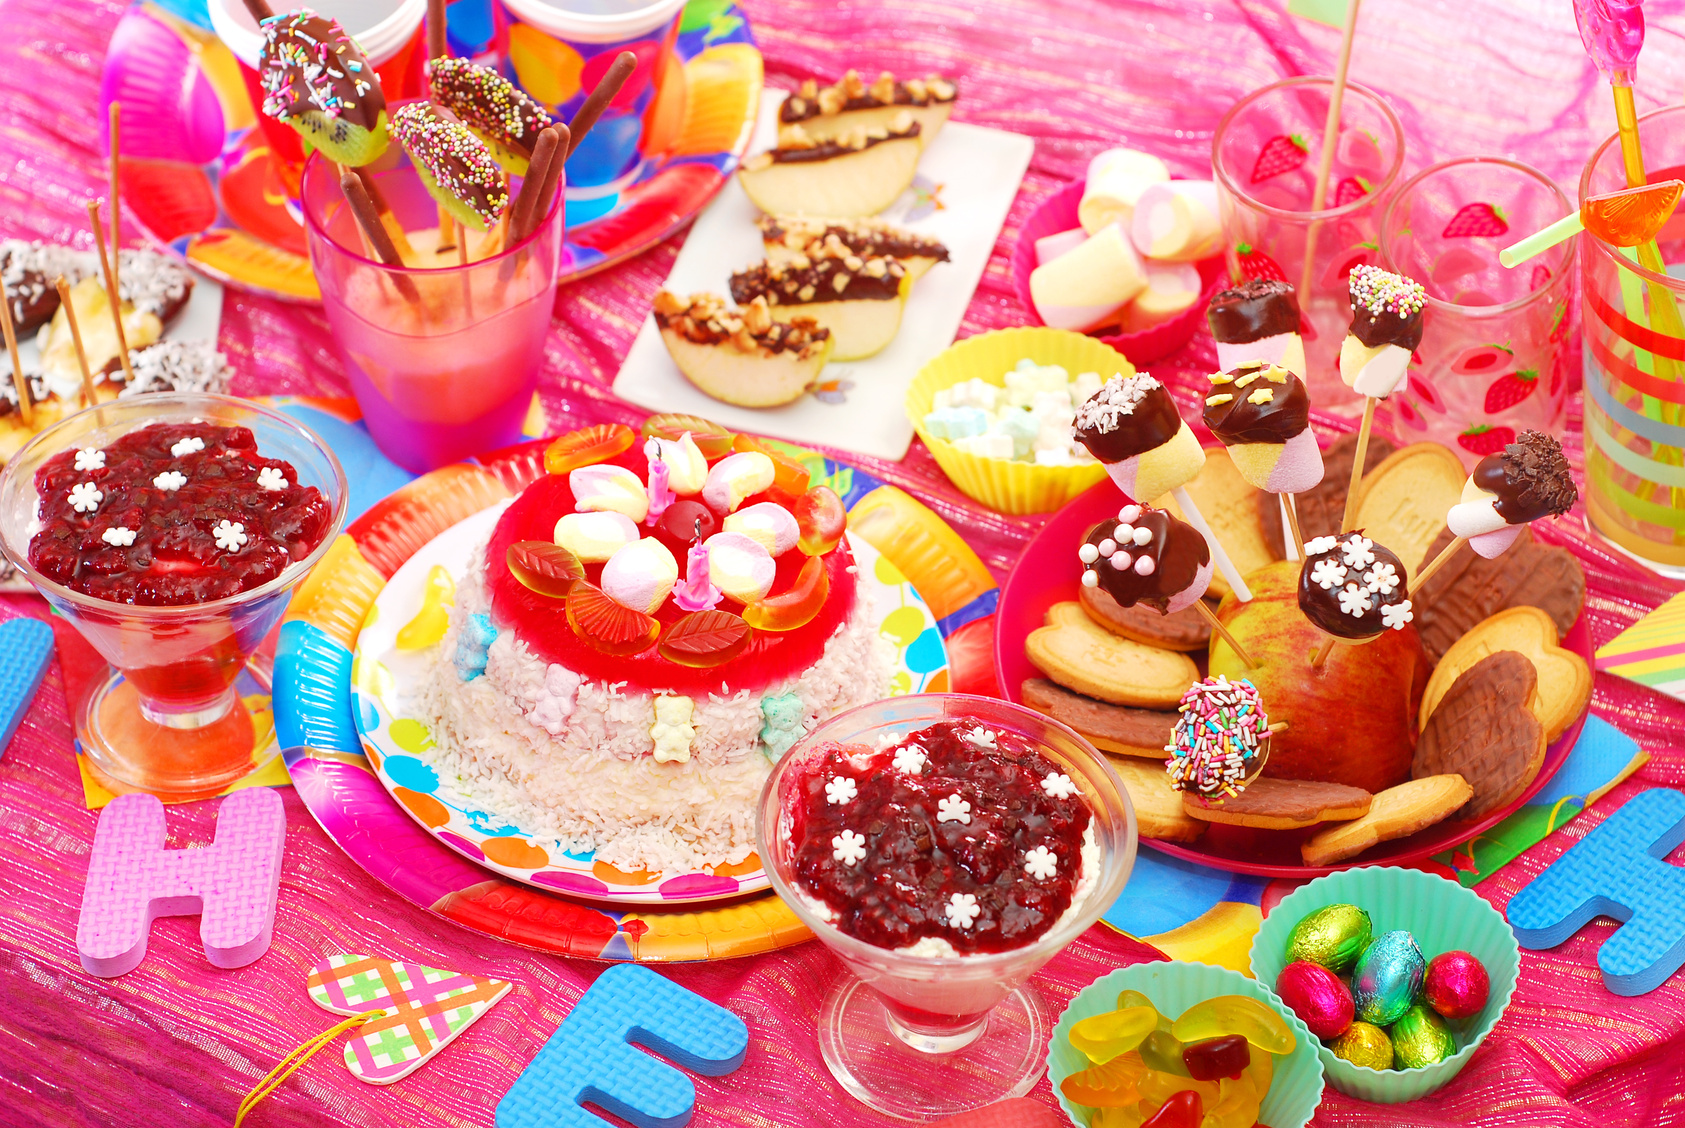 birthday party with homemade torte and fruit sweets for children